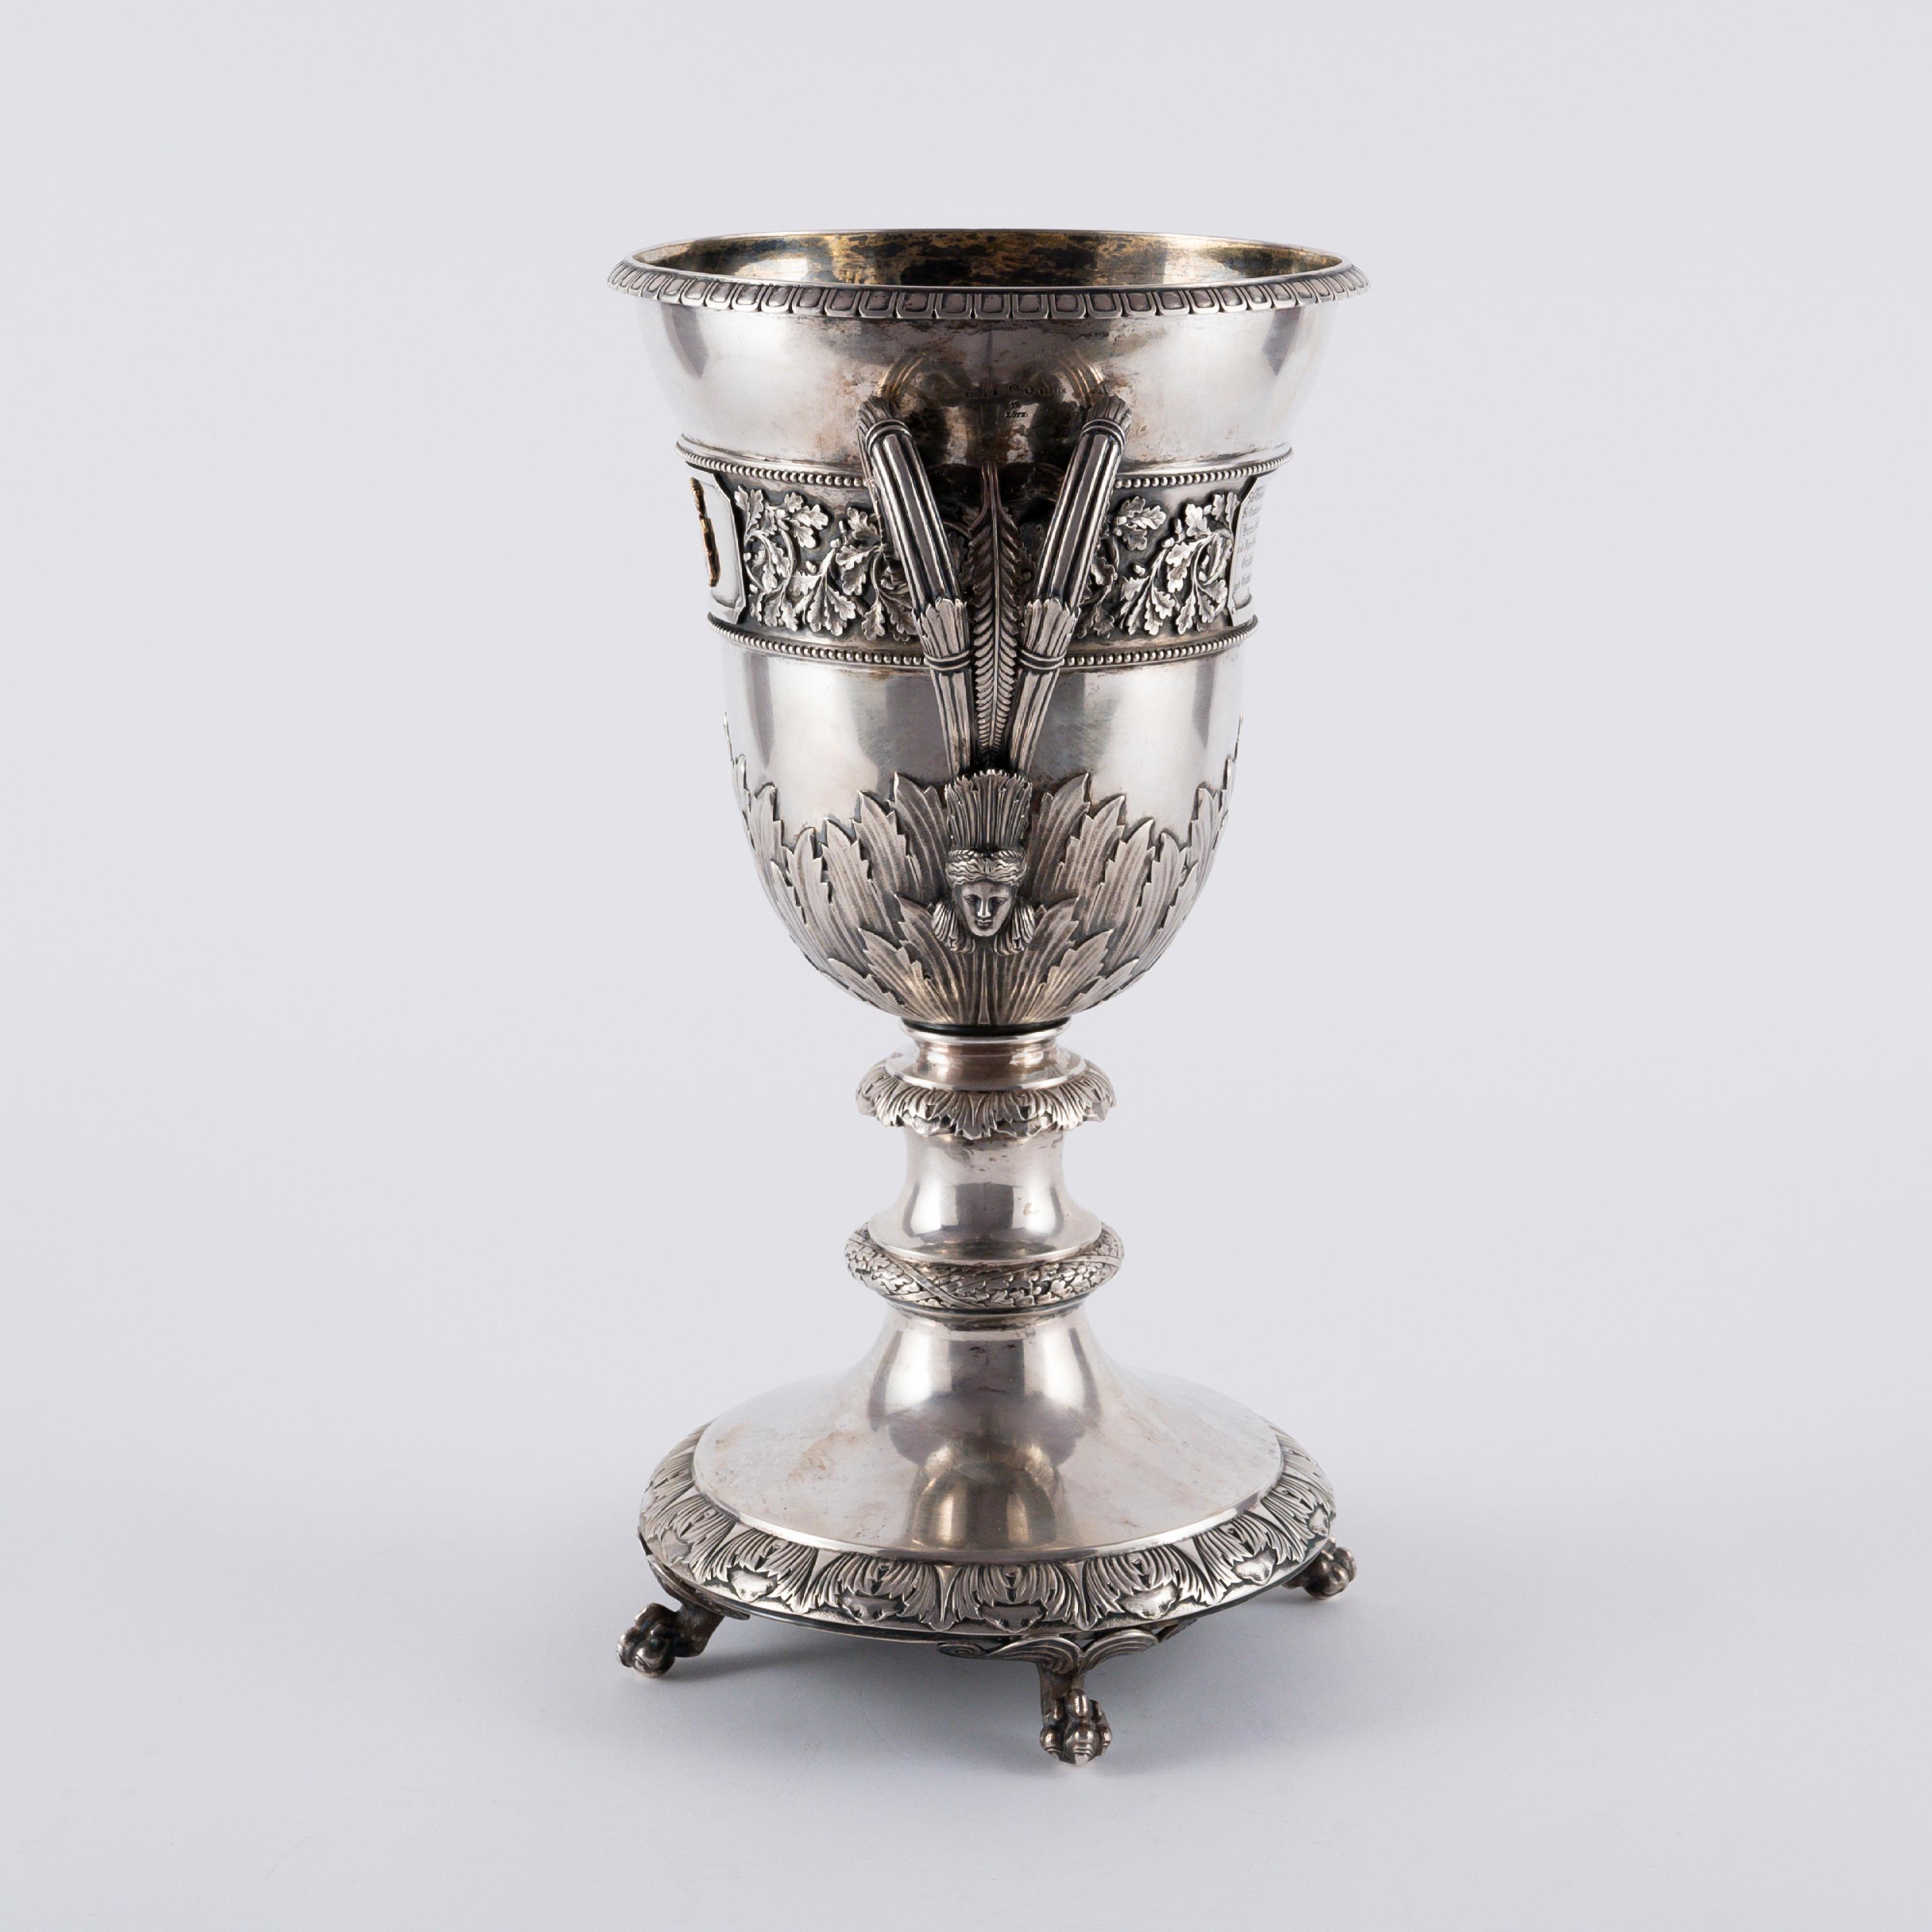 MAGNIFICENT SILVER DOUBLE HANDLED GOBLET WITH DEDICATION FOR THE SILVER WEDDING ANNIVERSARY OF COUNT - Image 3 of 7